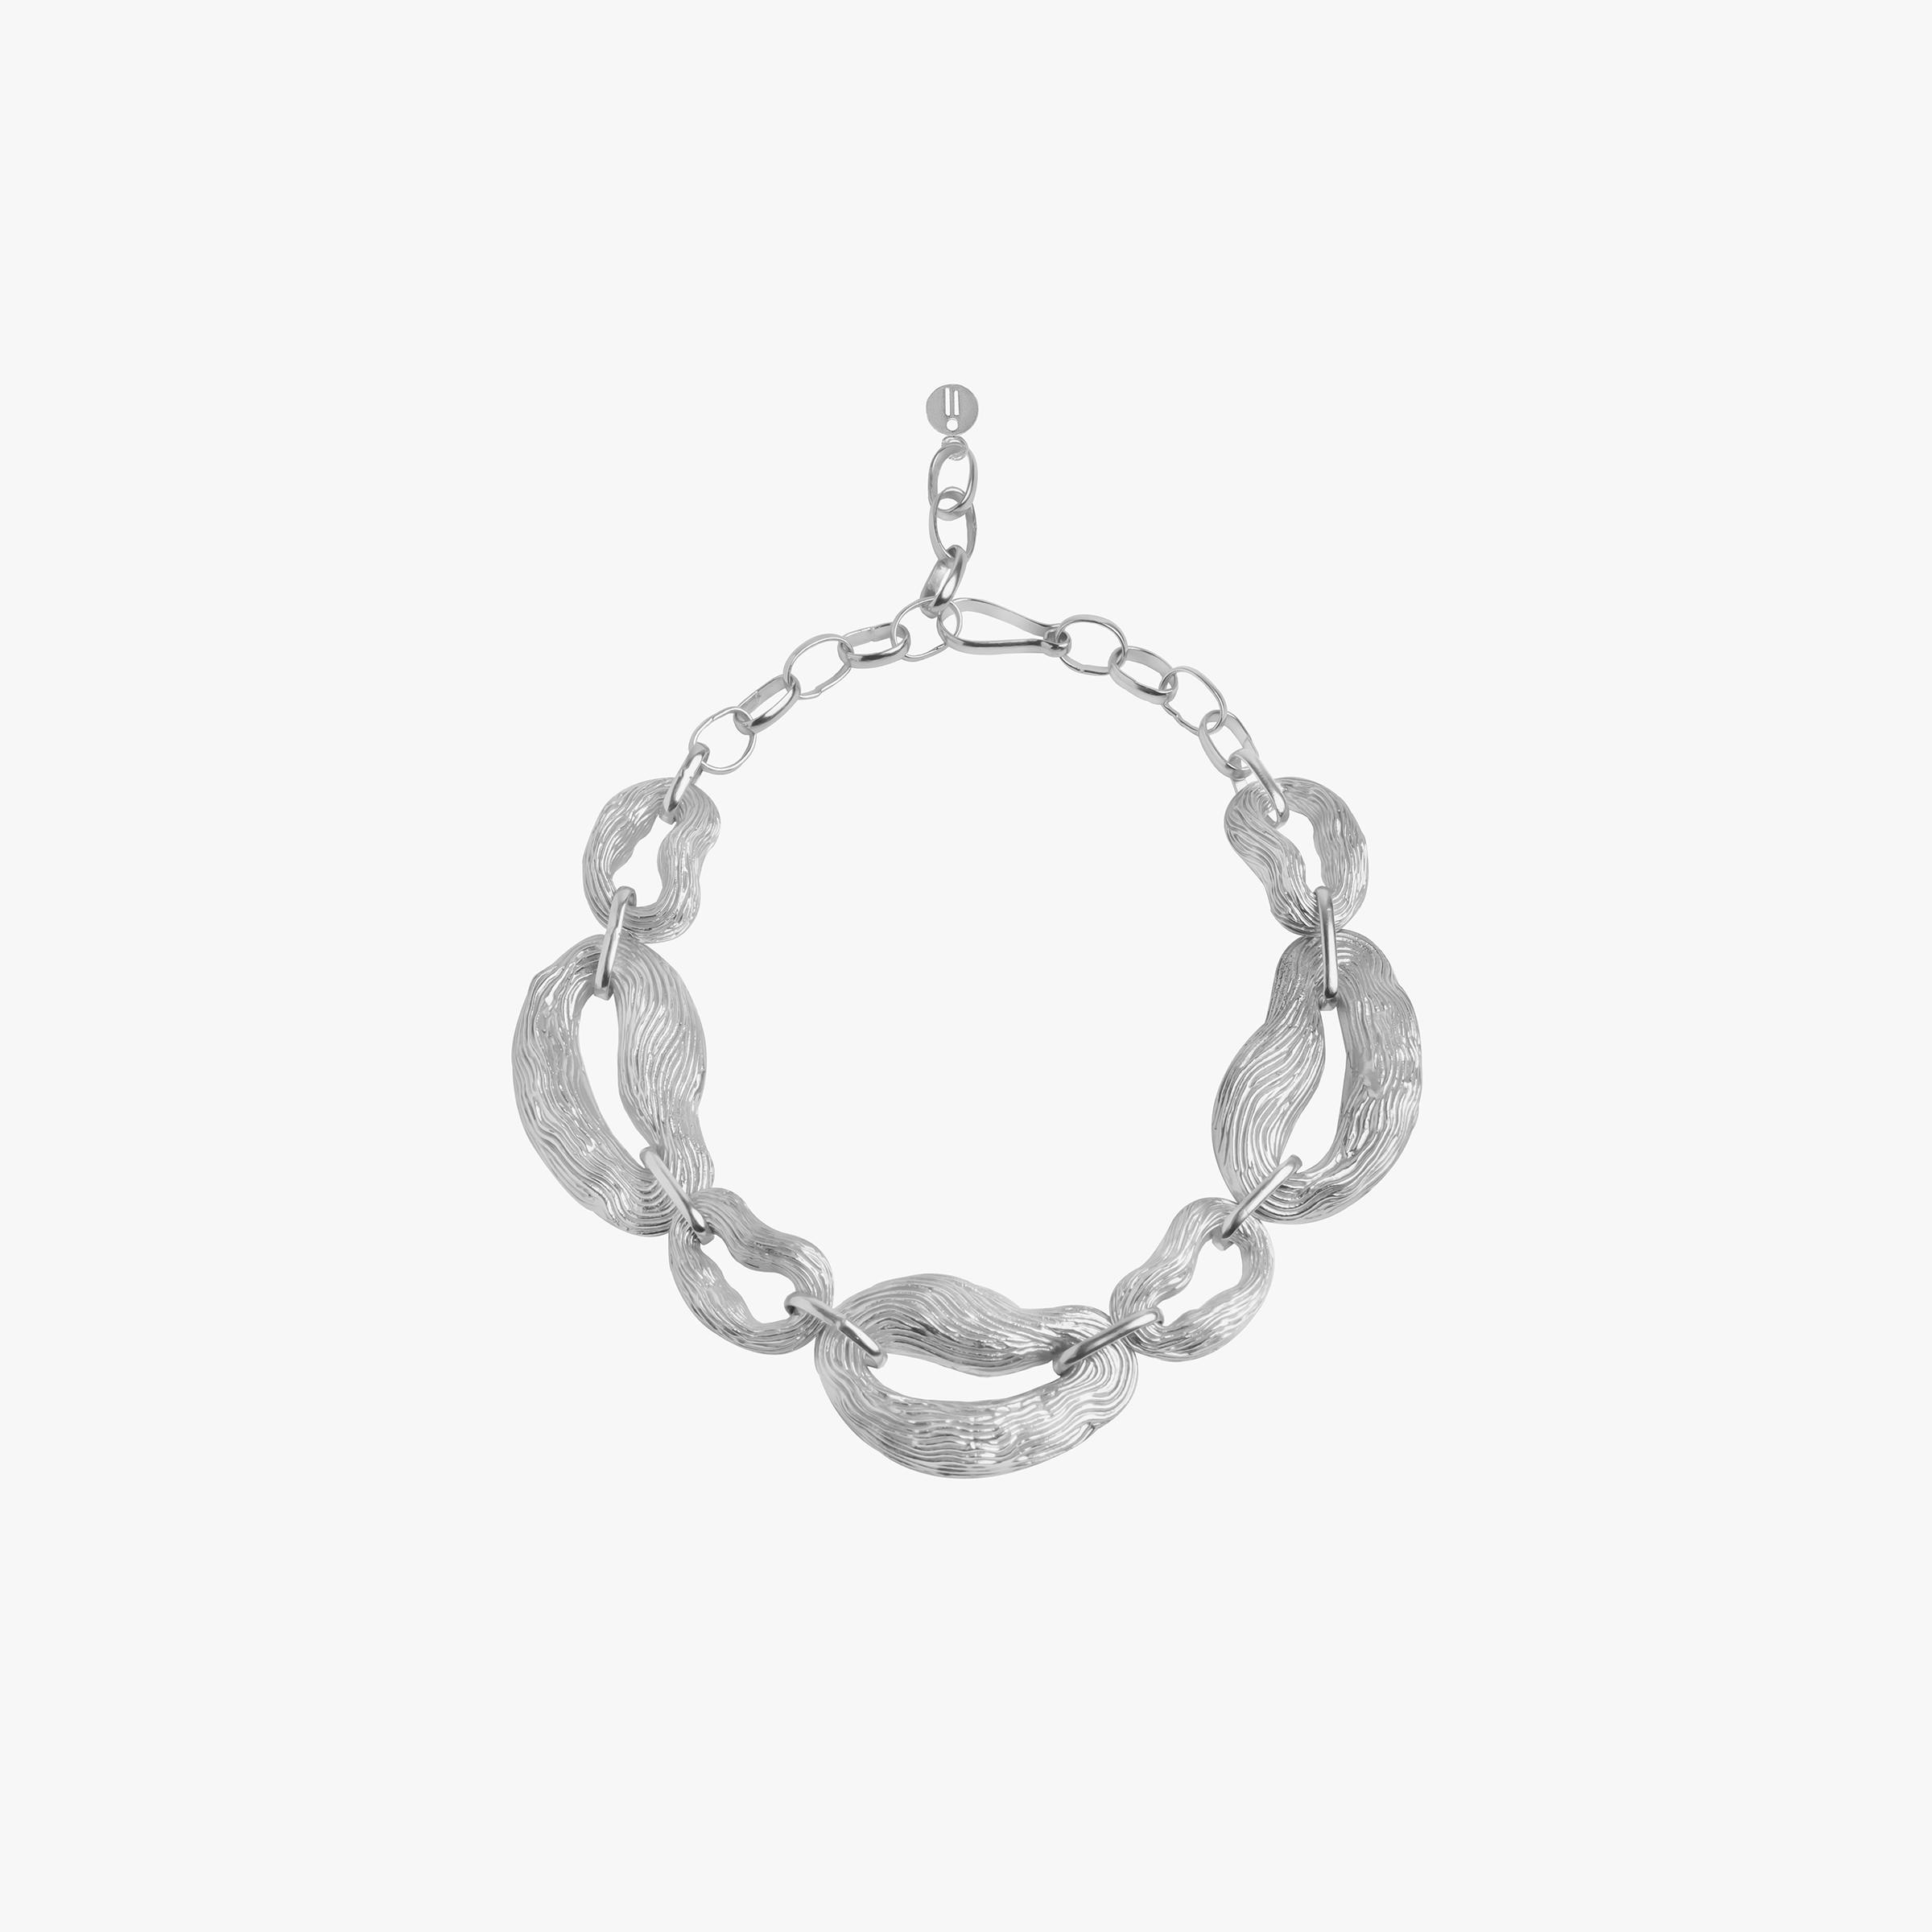 KNOTTY LINK NECKLACE SILVER TONE , a product by Equiivalence